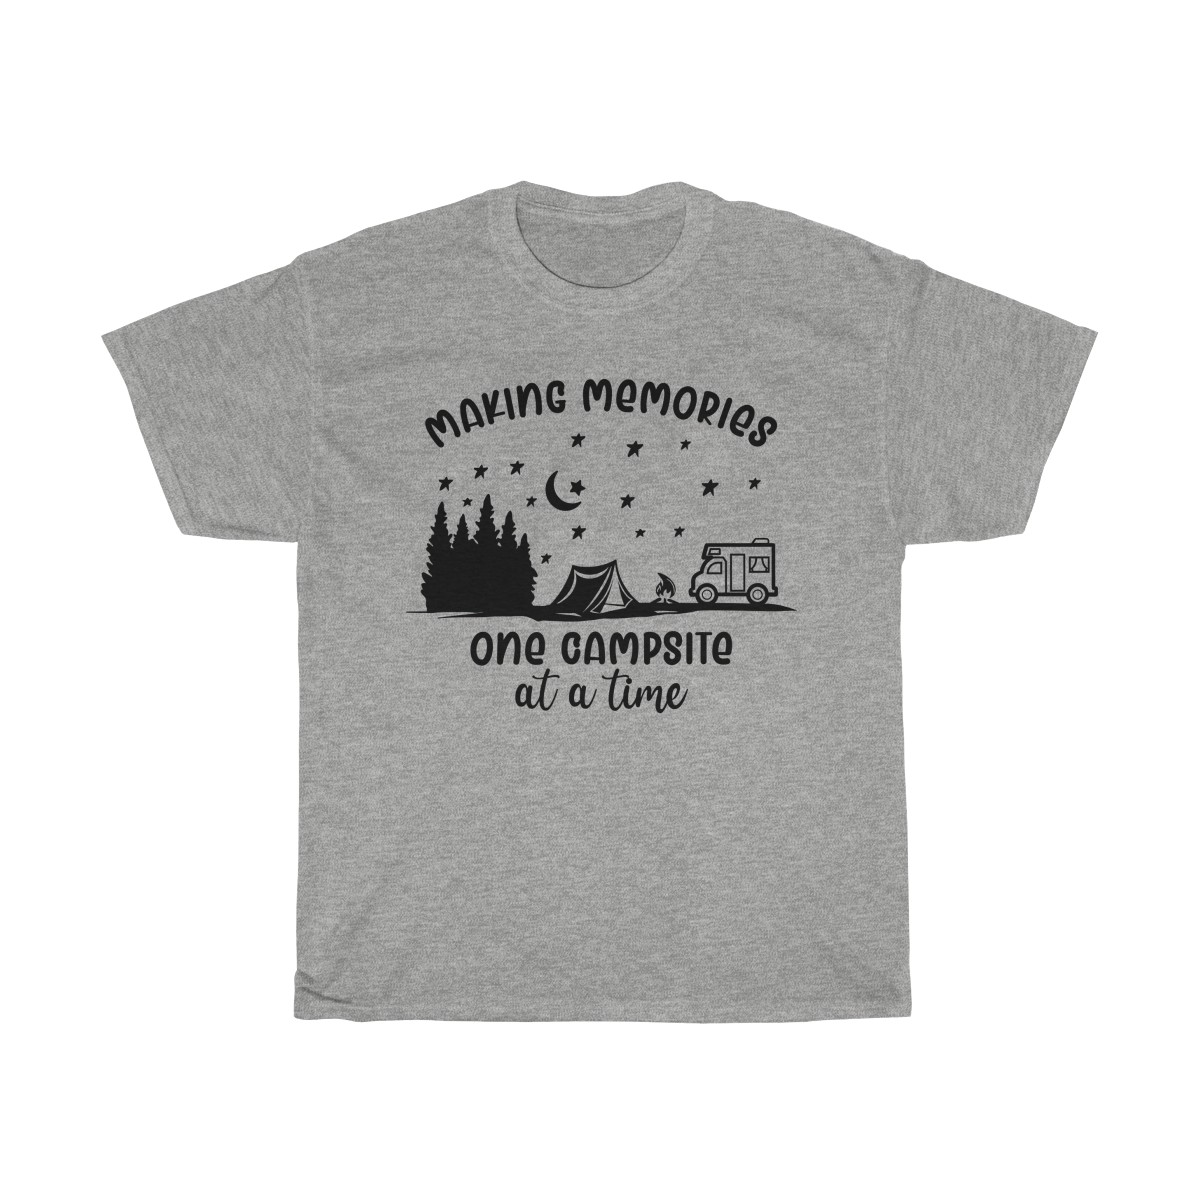 Making Memories One Campsite At A Time Unisex T-Shirt, Sweatshirt, Hoodie